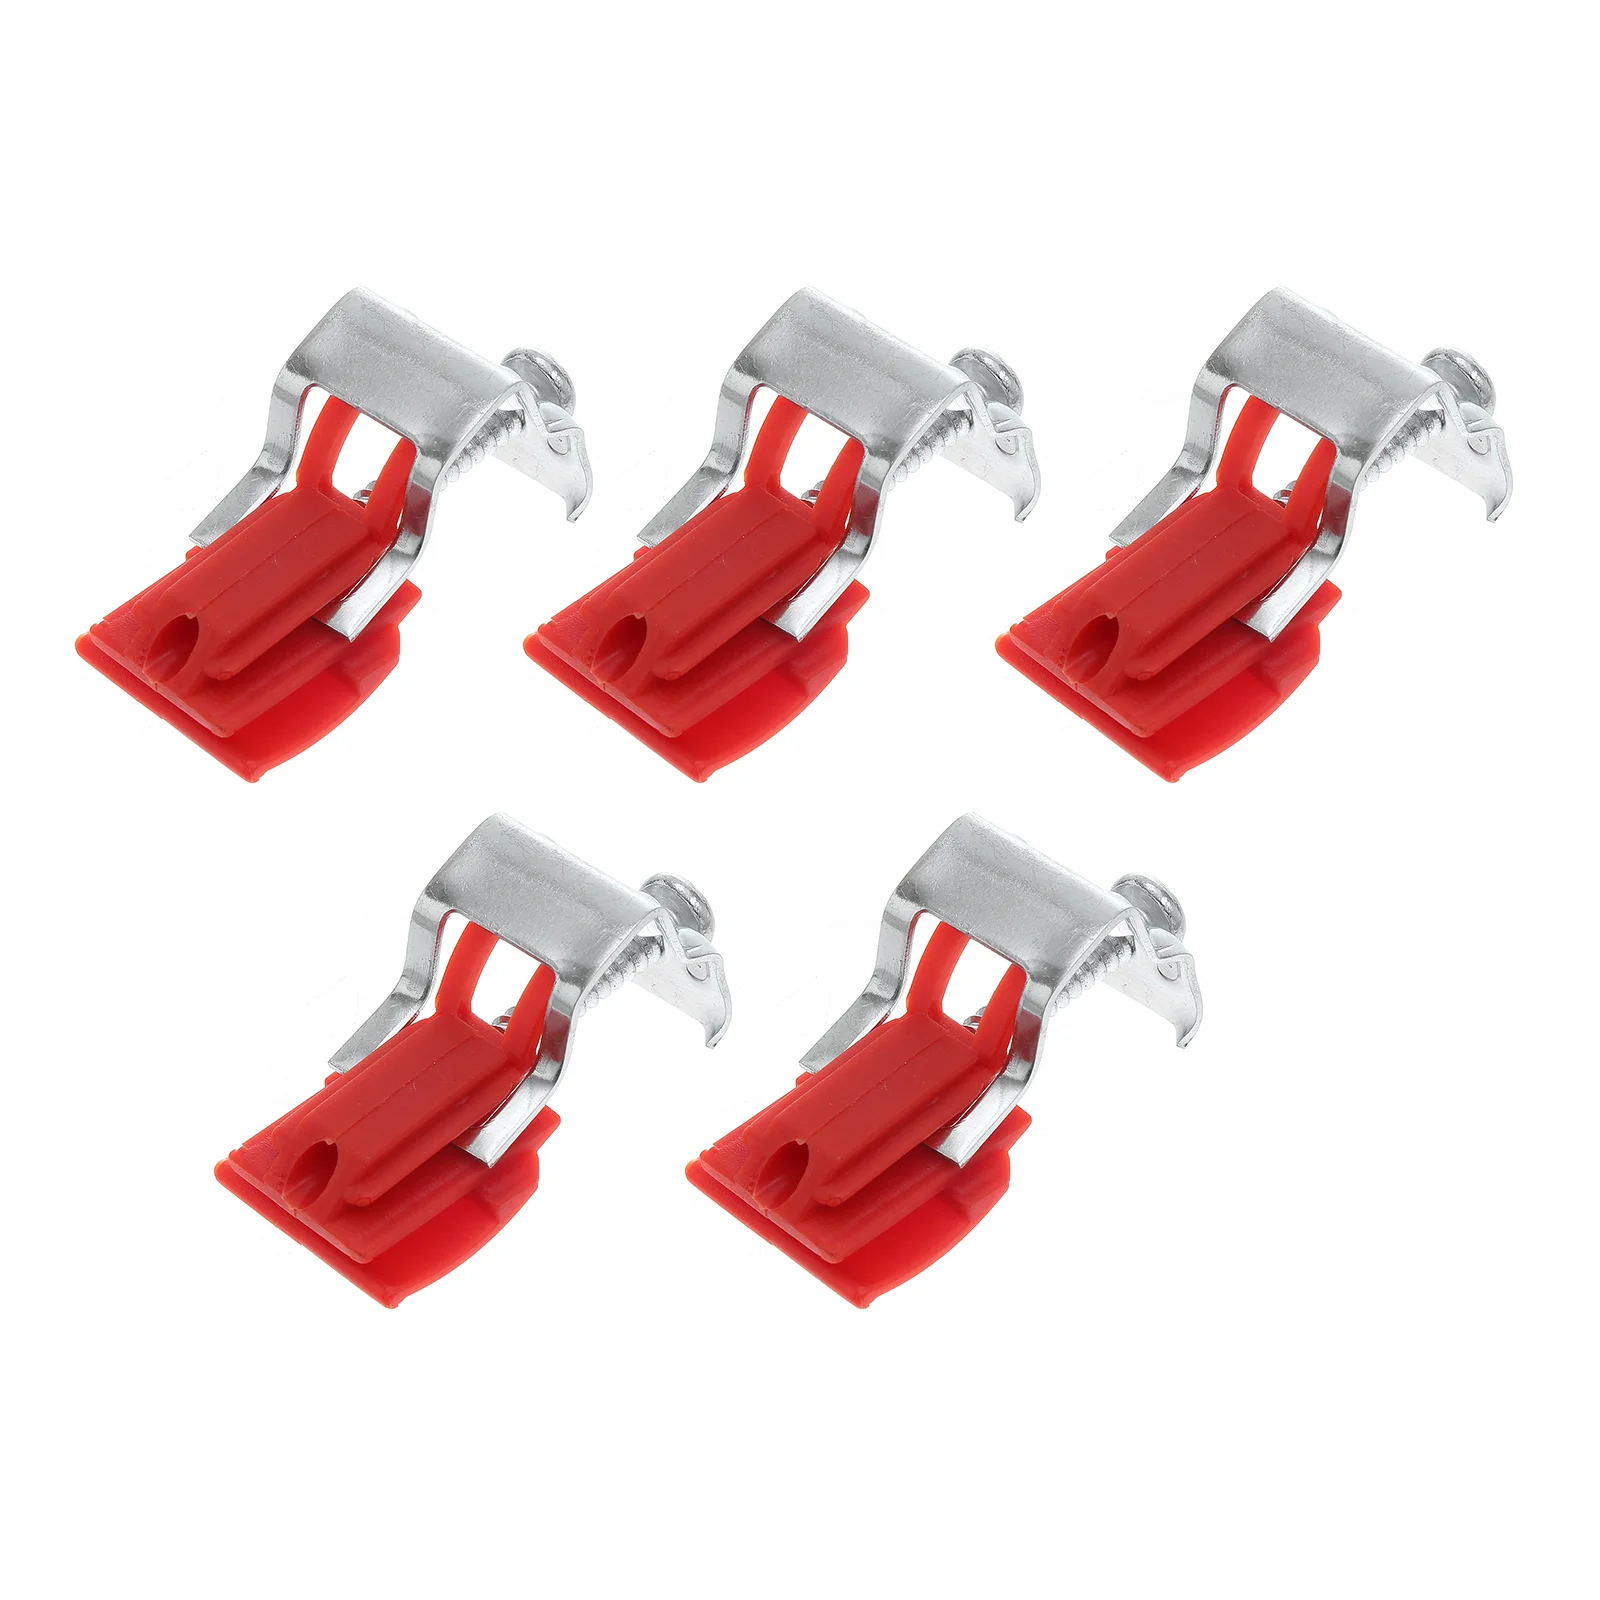 

Sink Kitchen Clips Mounting Fixing Undermount Clip Brackets Clamp Clamps Rack Organizer Cord Wire Down Fittings Parts Gadget